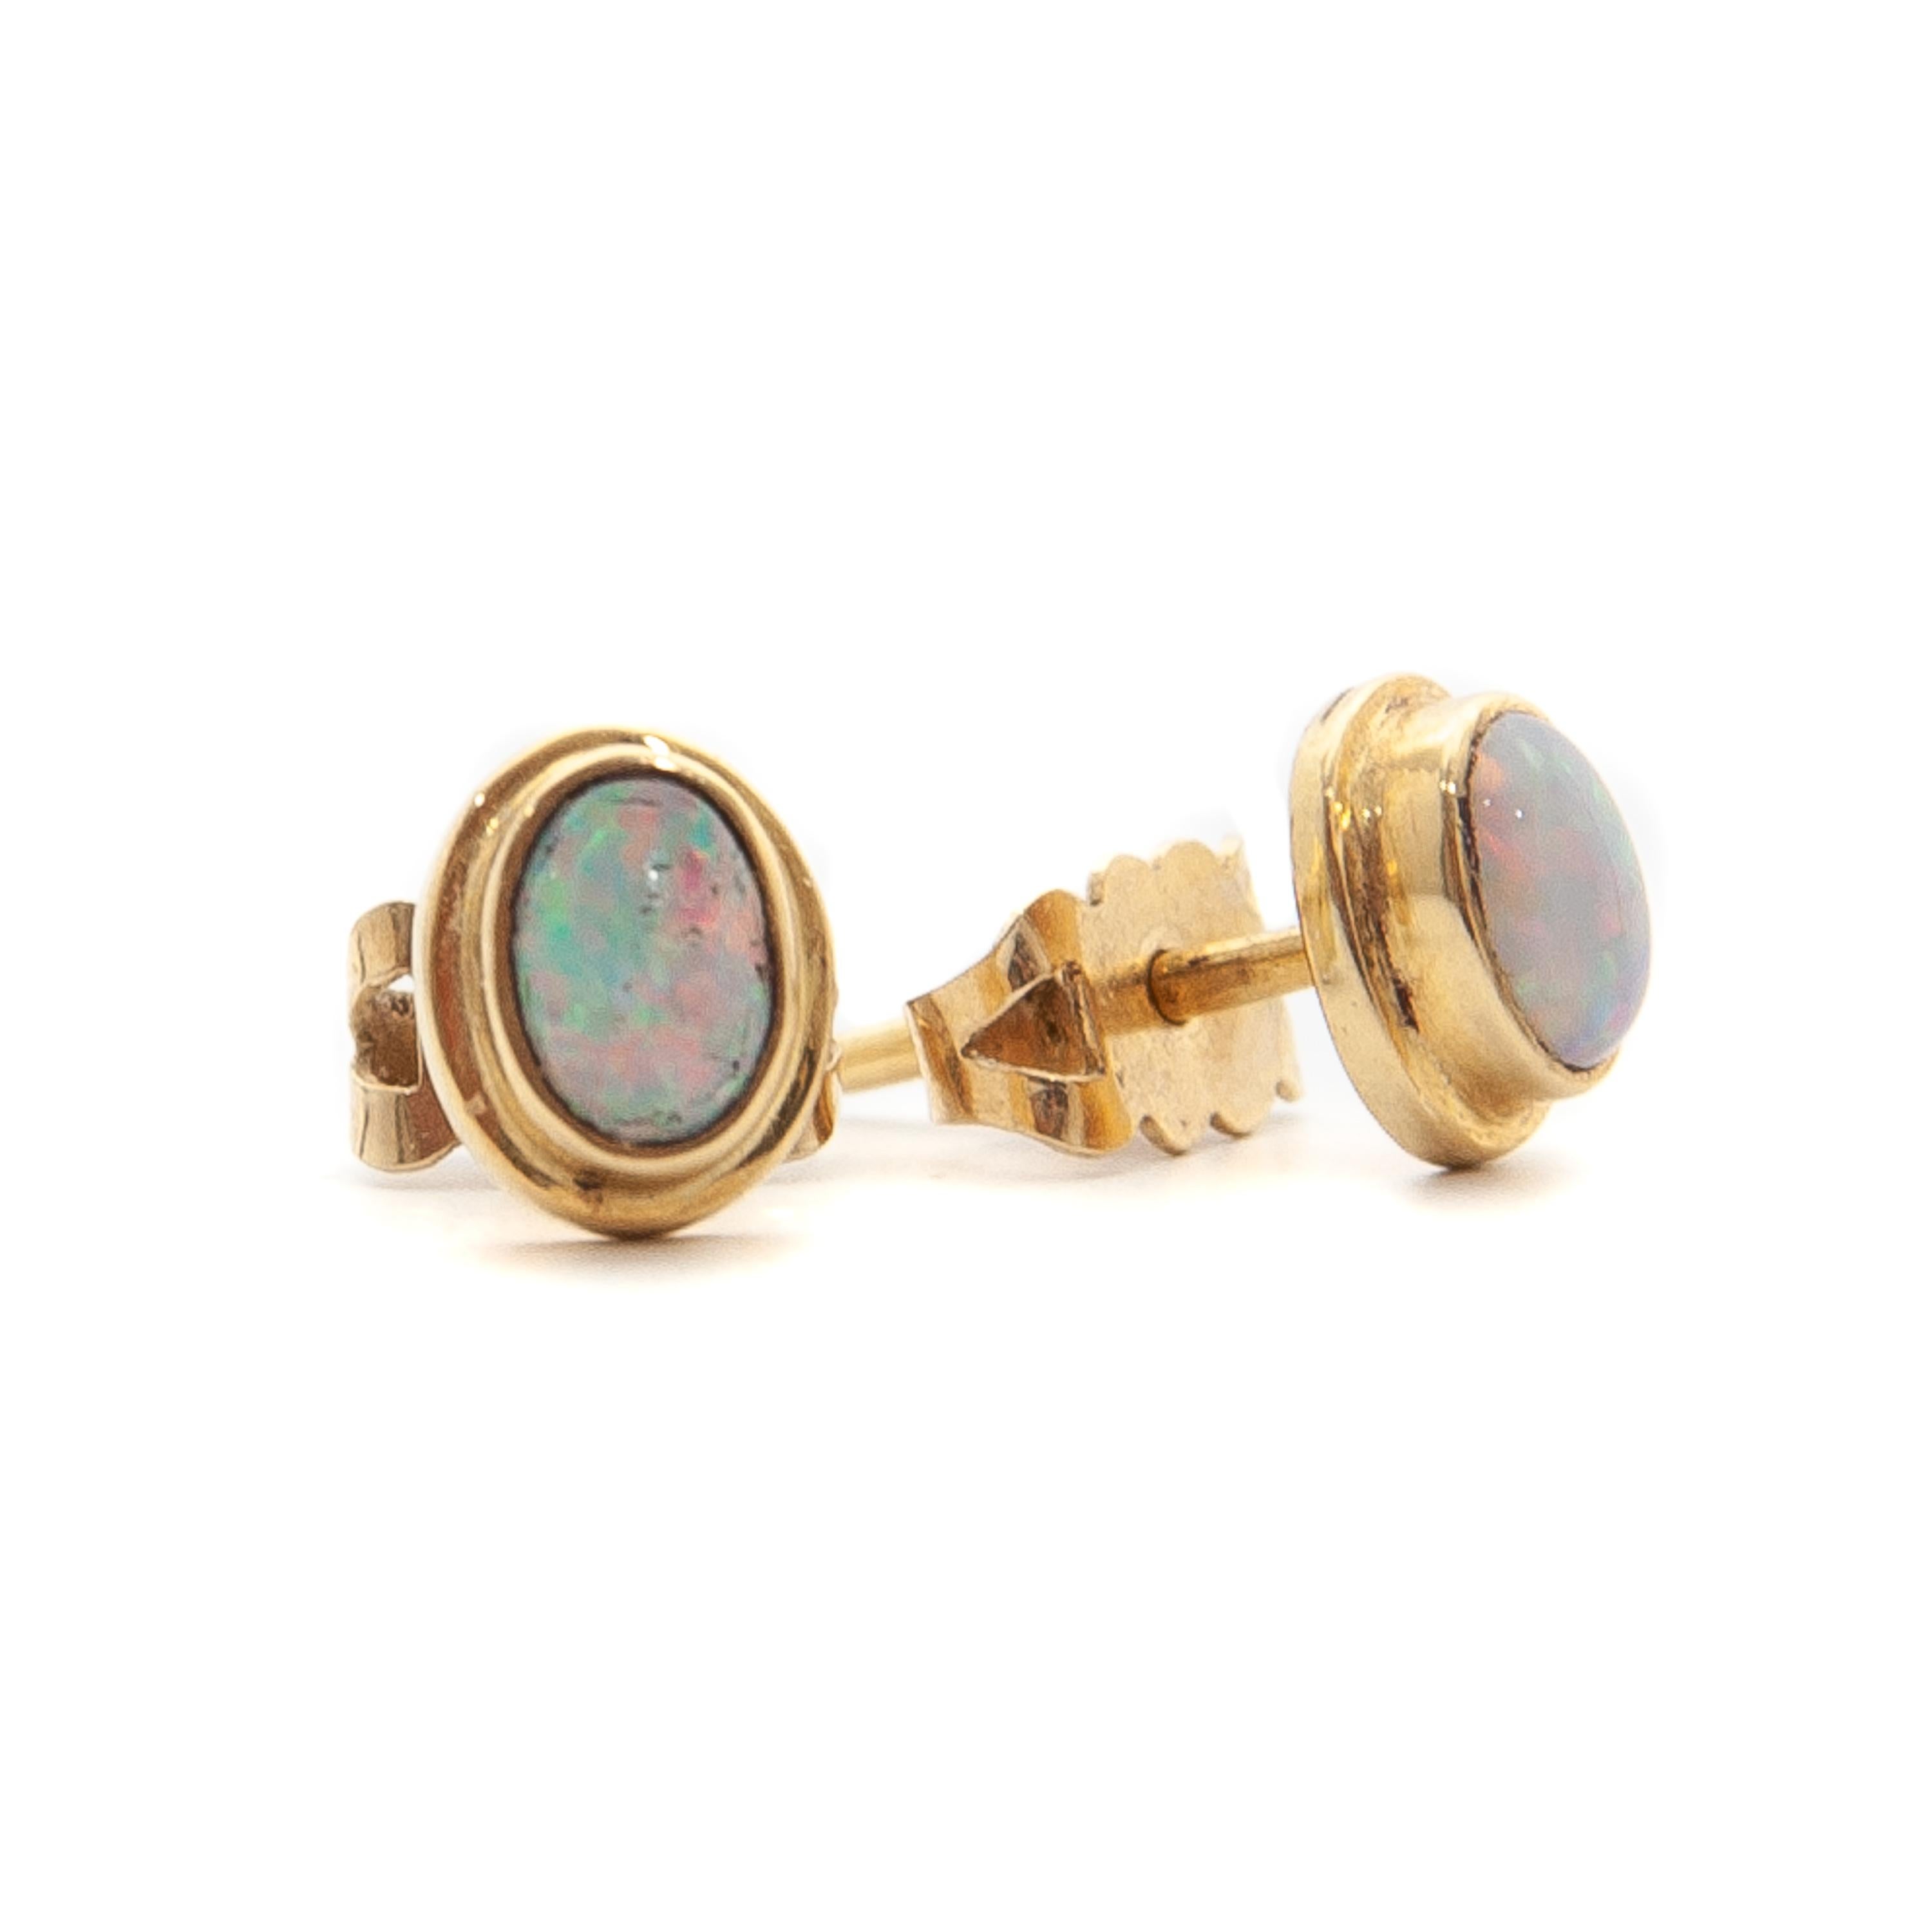 Opal is one of the stones celebrated as the October birthstone. These oval shape cabochon opals are beautiful natural gemstones. Their rainbow-like iridescence changes with each angle of observation, revealing greens, blues, pinks, purples, and